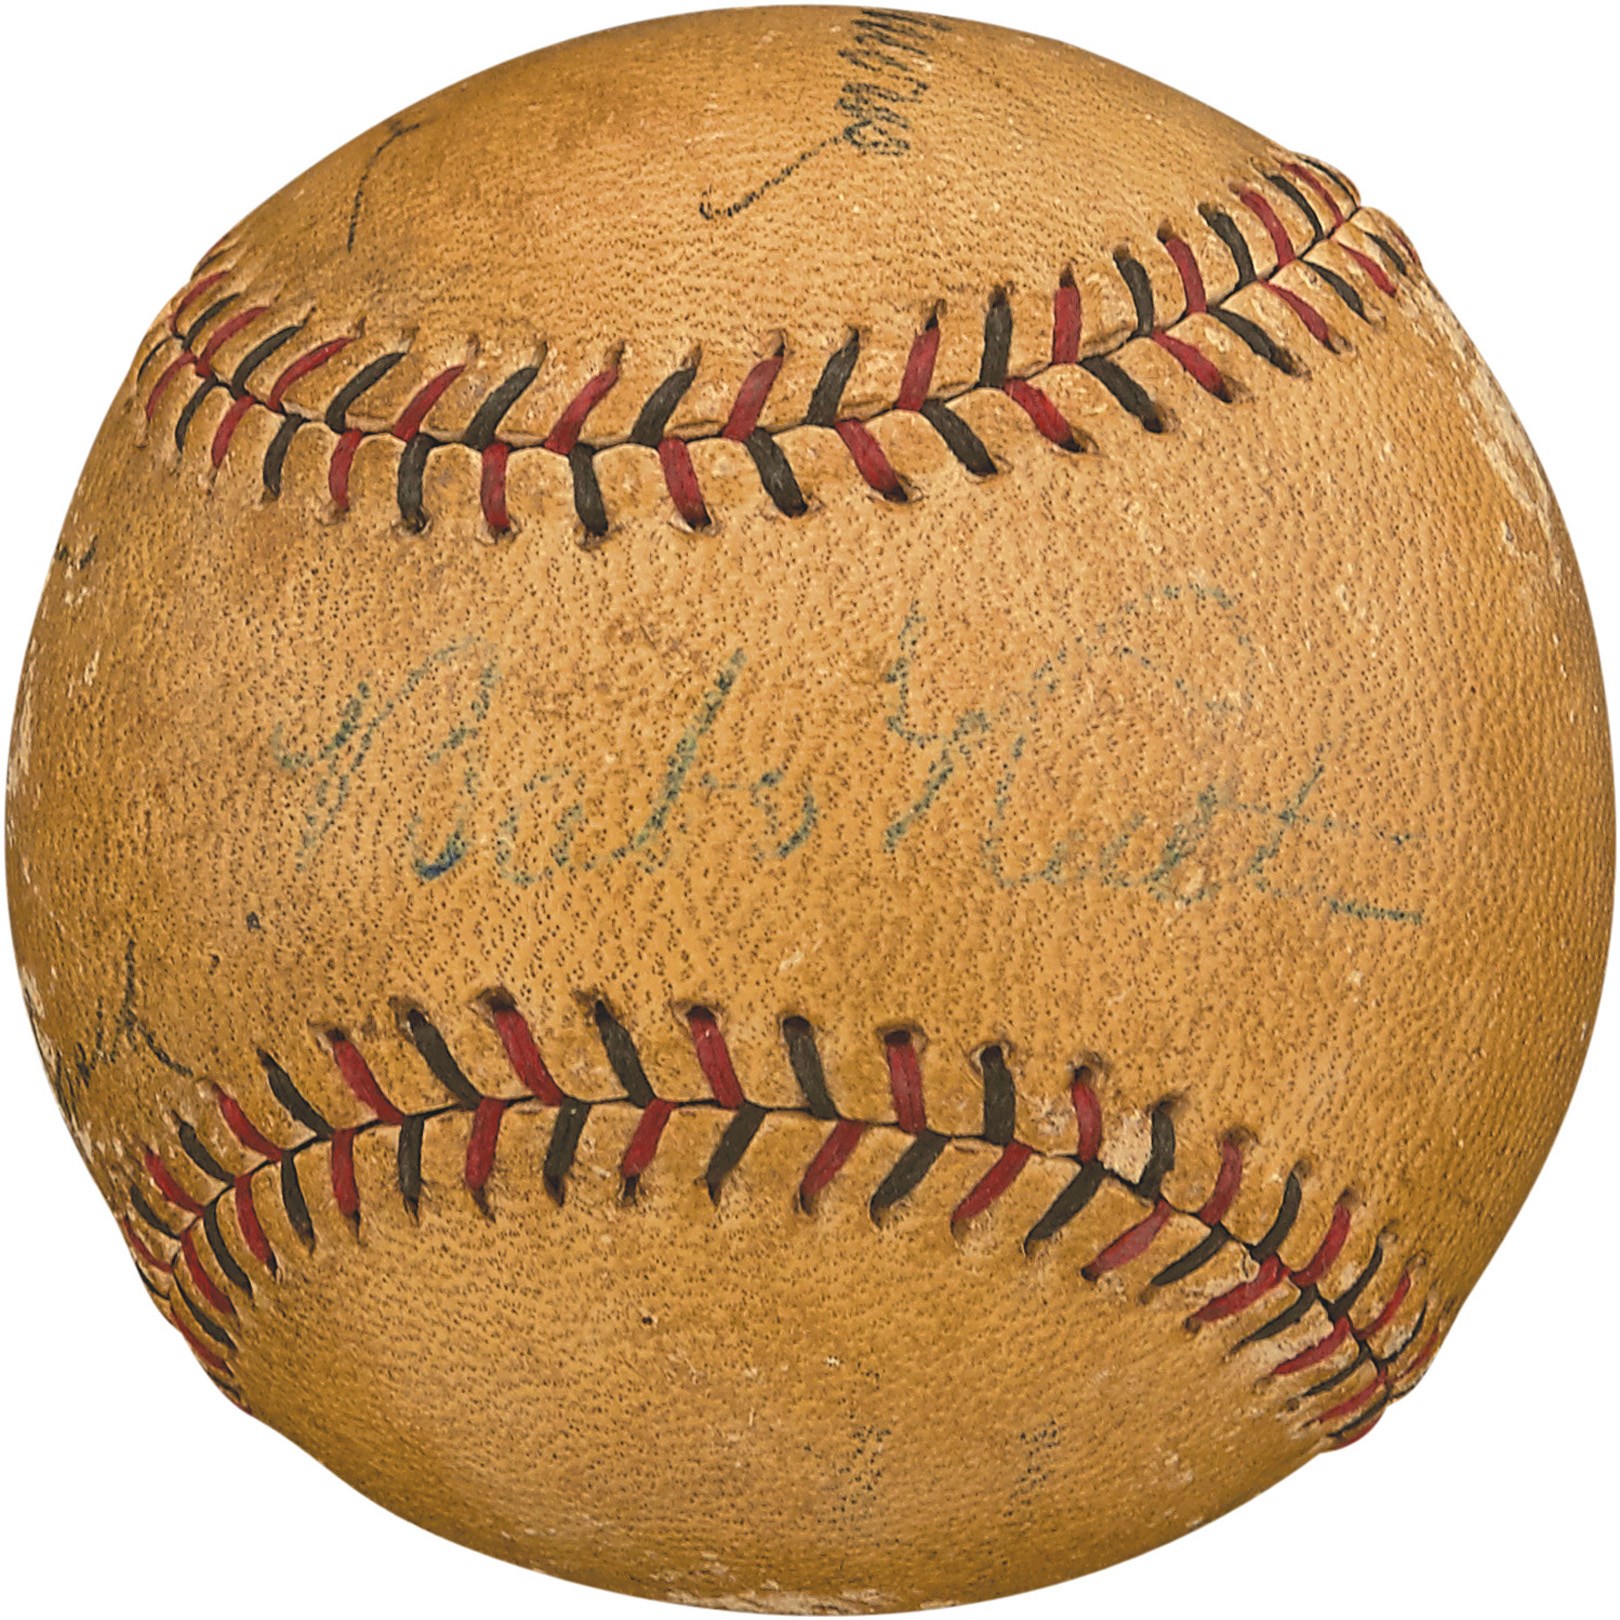 Baseball Autographs - 1930 World Series Teams-Signed Foul Ball w/Babe Ruth - Newspaper Article Provenance (PSA)